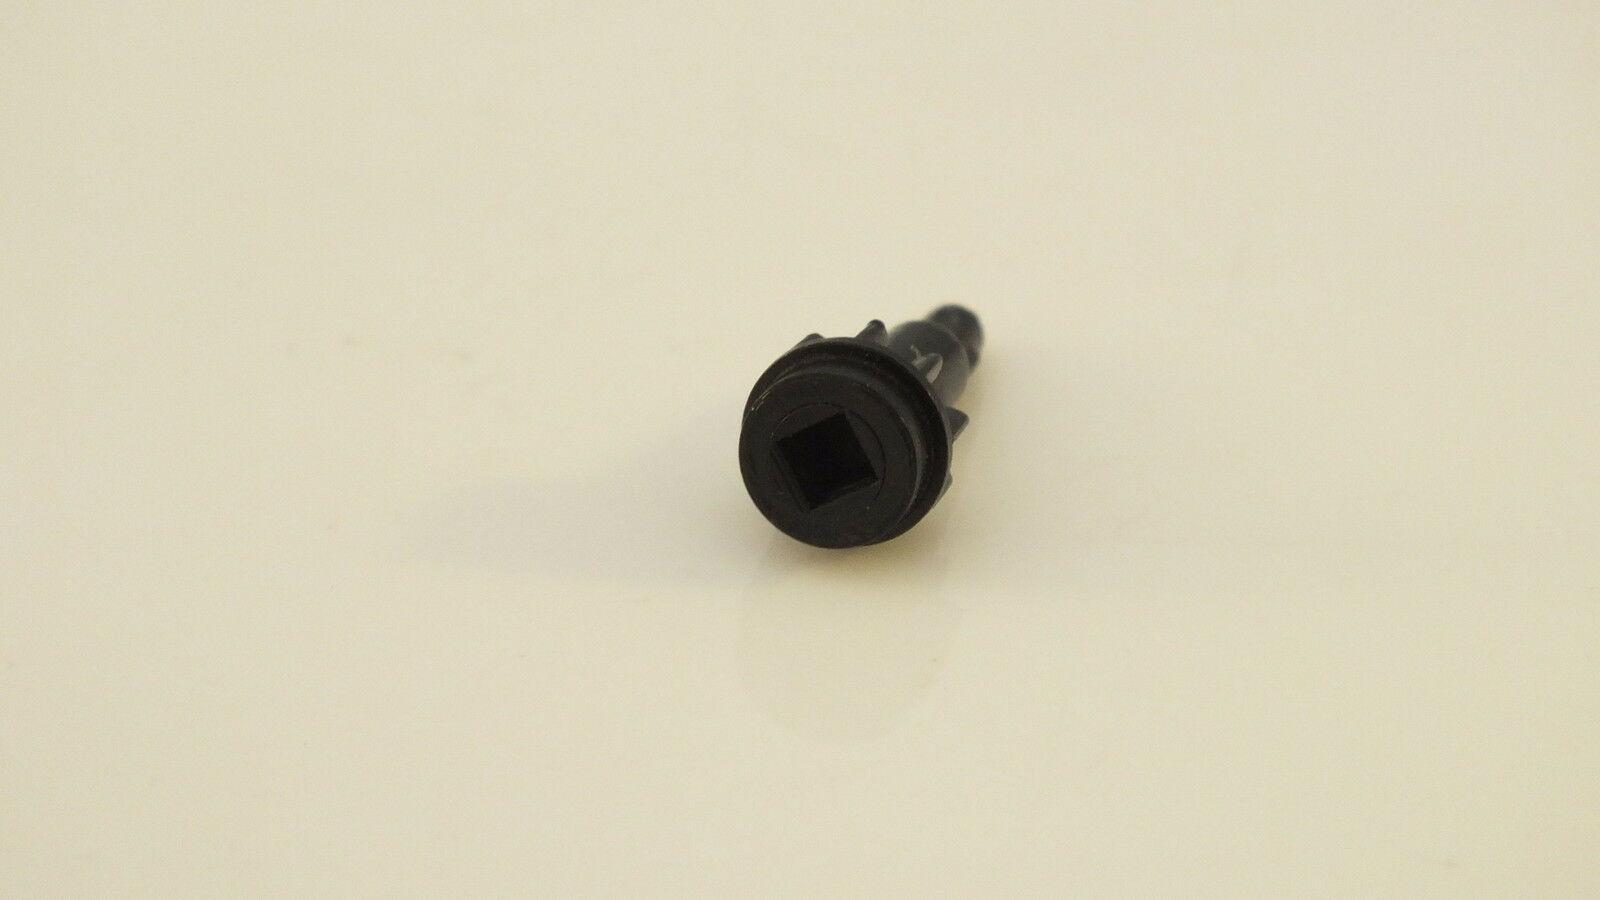 S9643 # HORNBY TRIANG SPARE PARTS SPIGOT GEAR SQUARE HOLE TURNTABLE         U2D